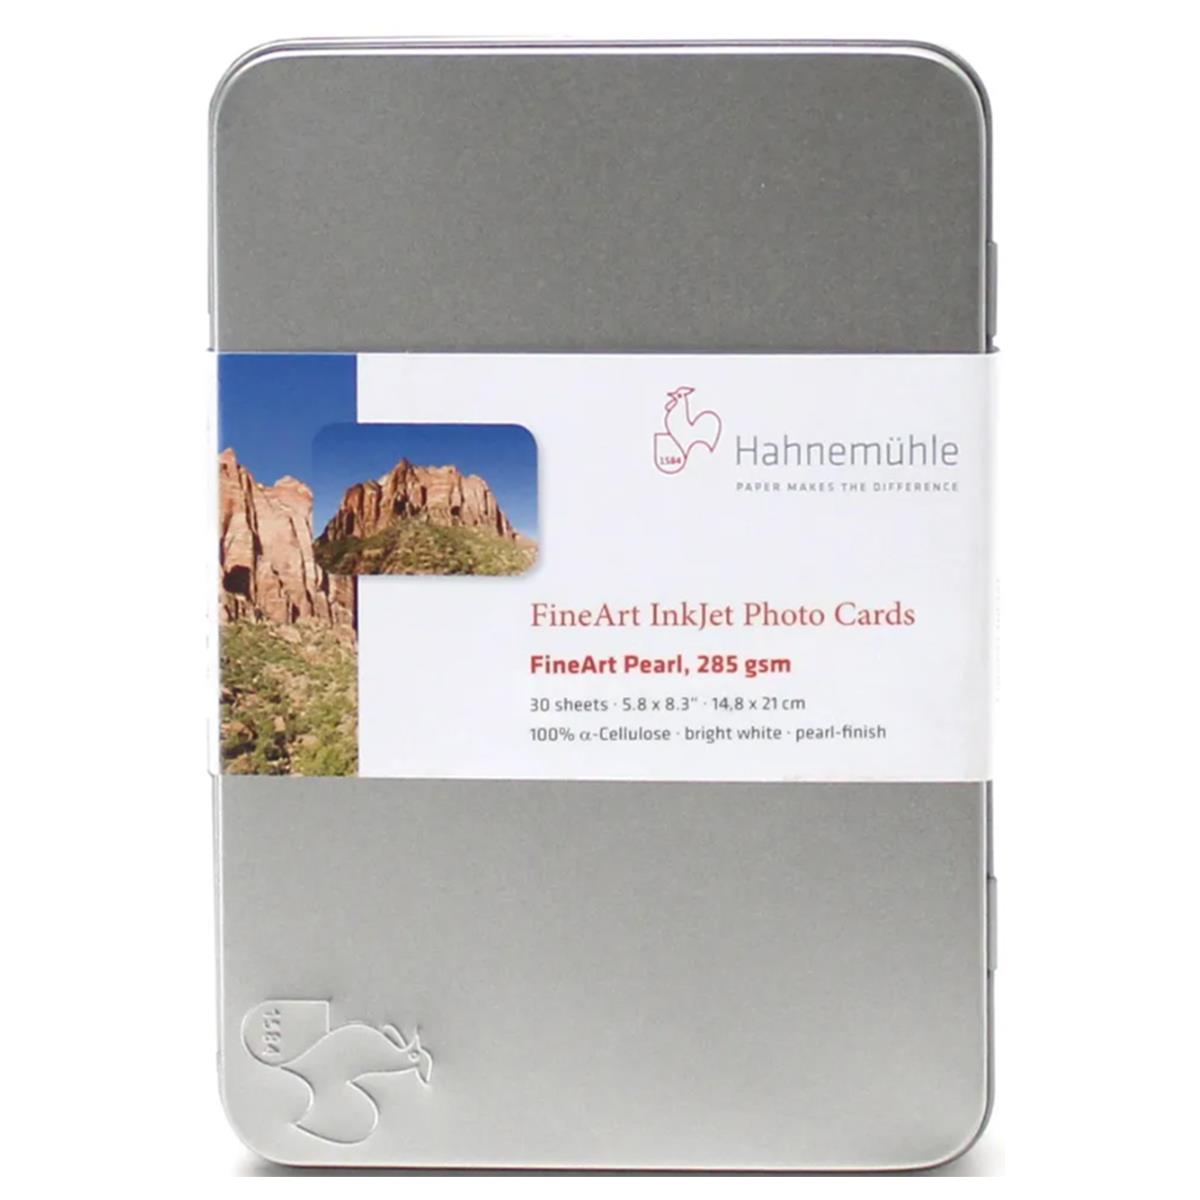 Image of Hahnemuhle FineArt Pearl Inkjet Photo Cards